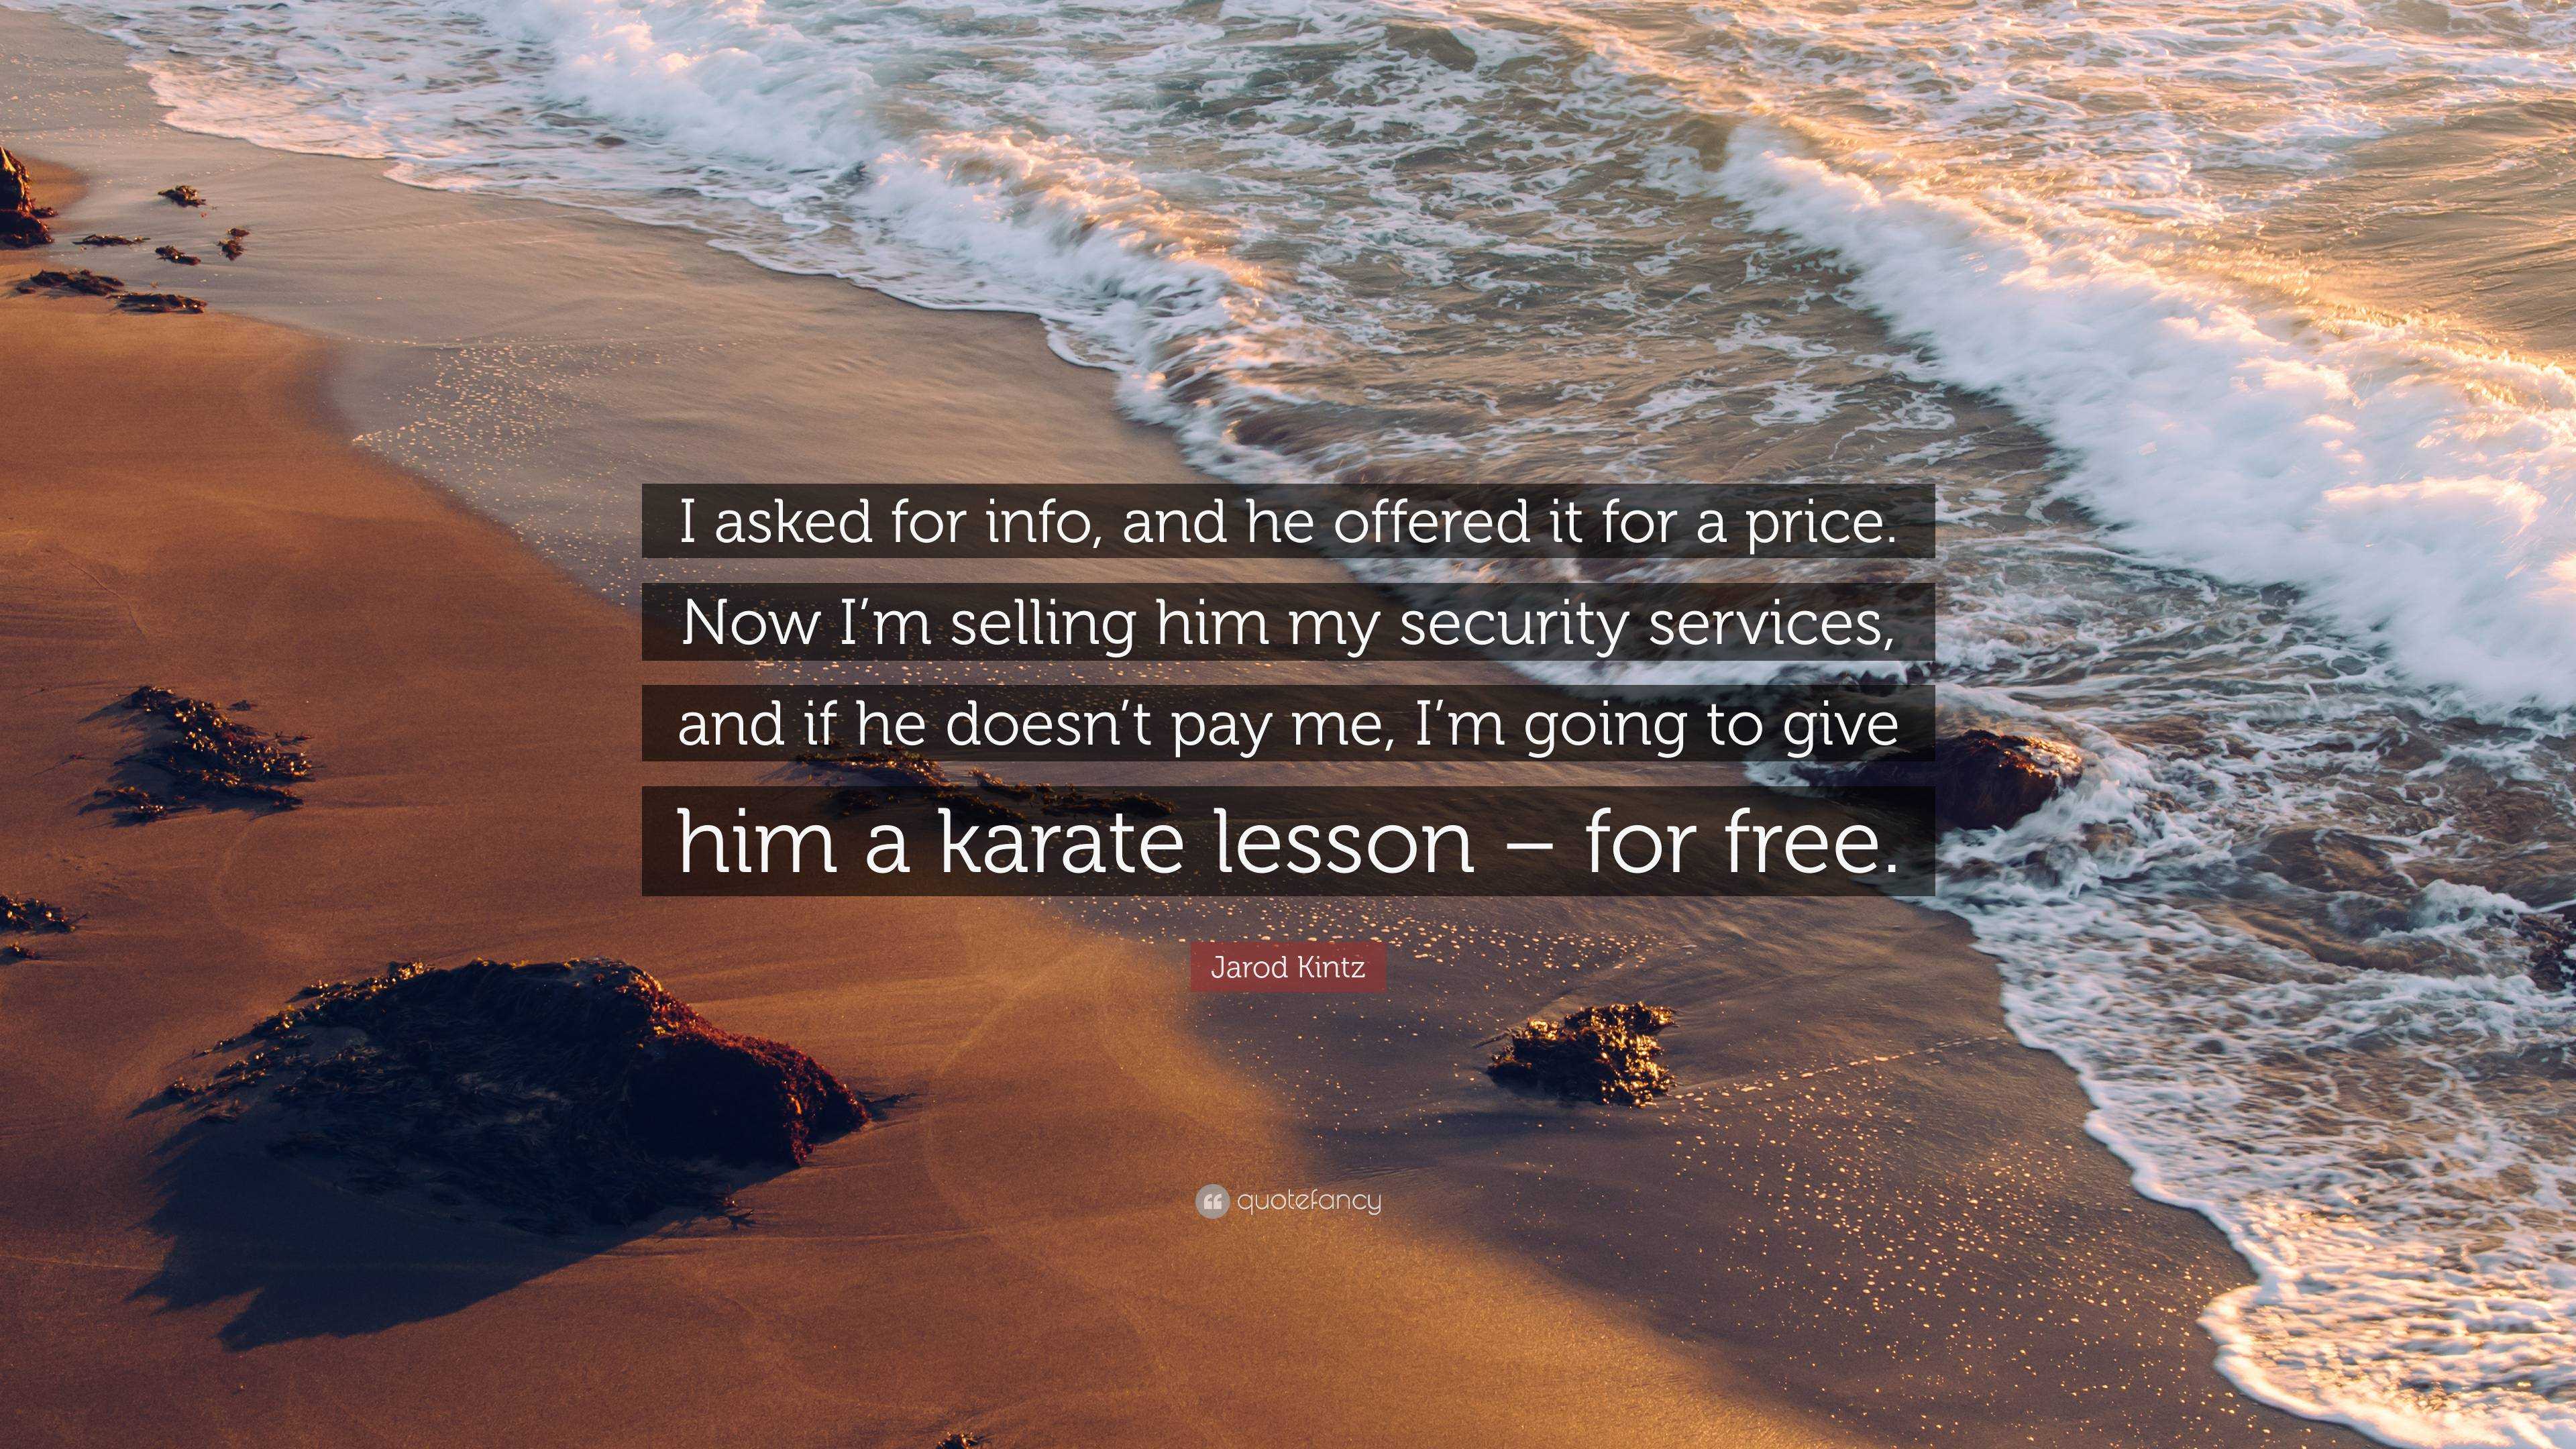 https://quotefancy.com/media/wallpaper/3840x2160/6411403-Jarod-Kintz-Quote-I-asked-for-info-and-he-offered-it-for-a-price.jpg